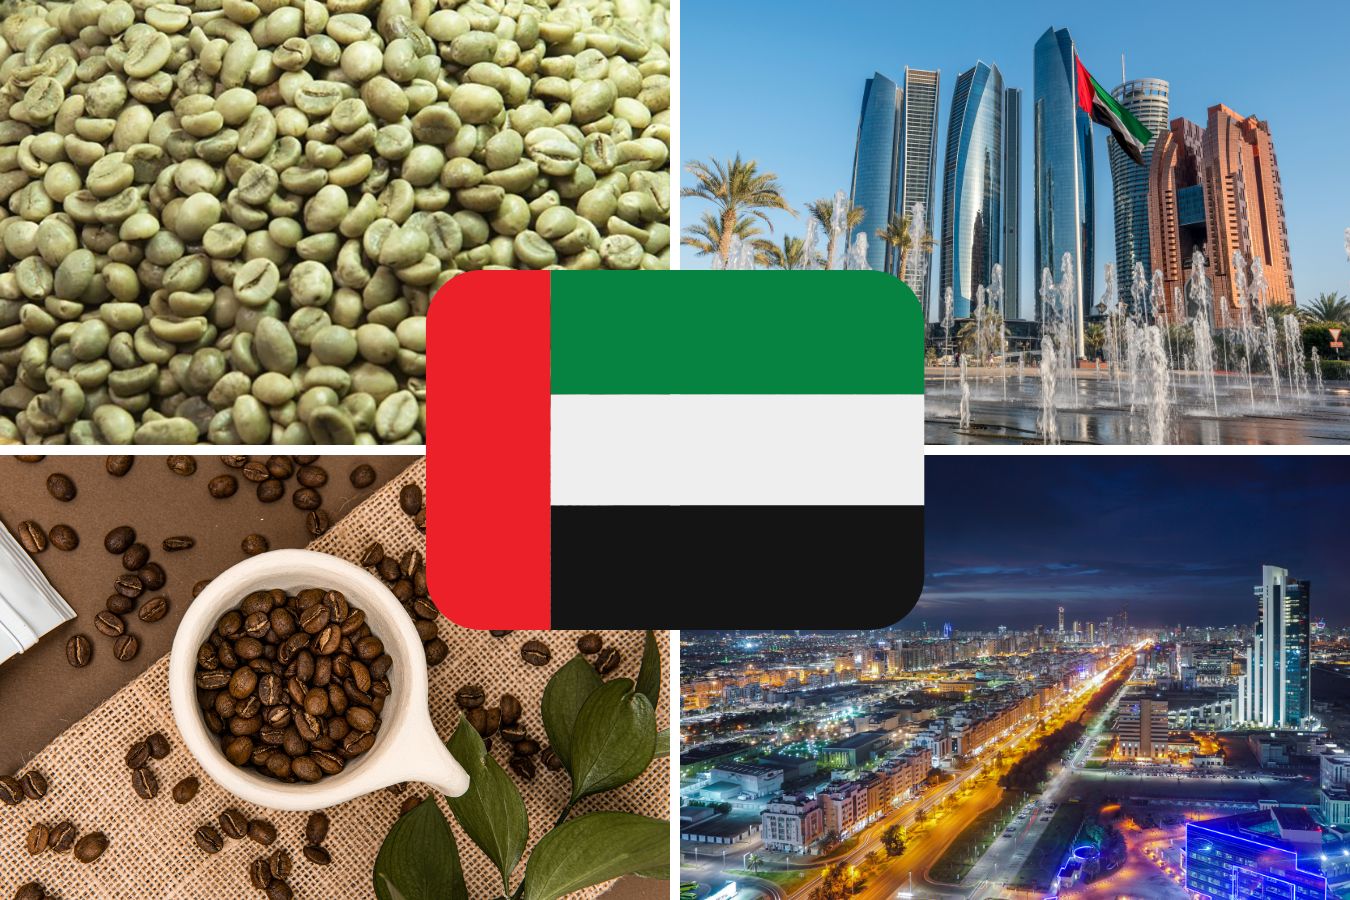 10 Powerful Steps for Coffee Beans Import and Export to Dubai, UAE